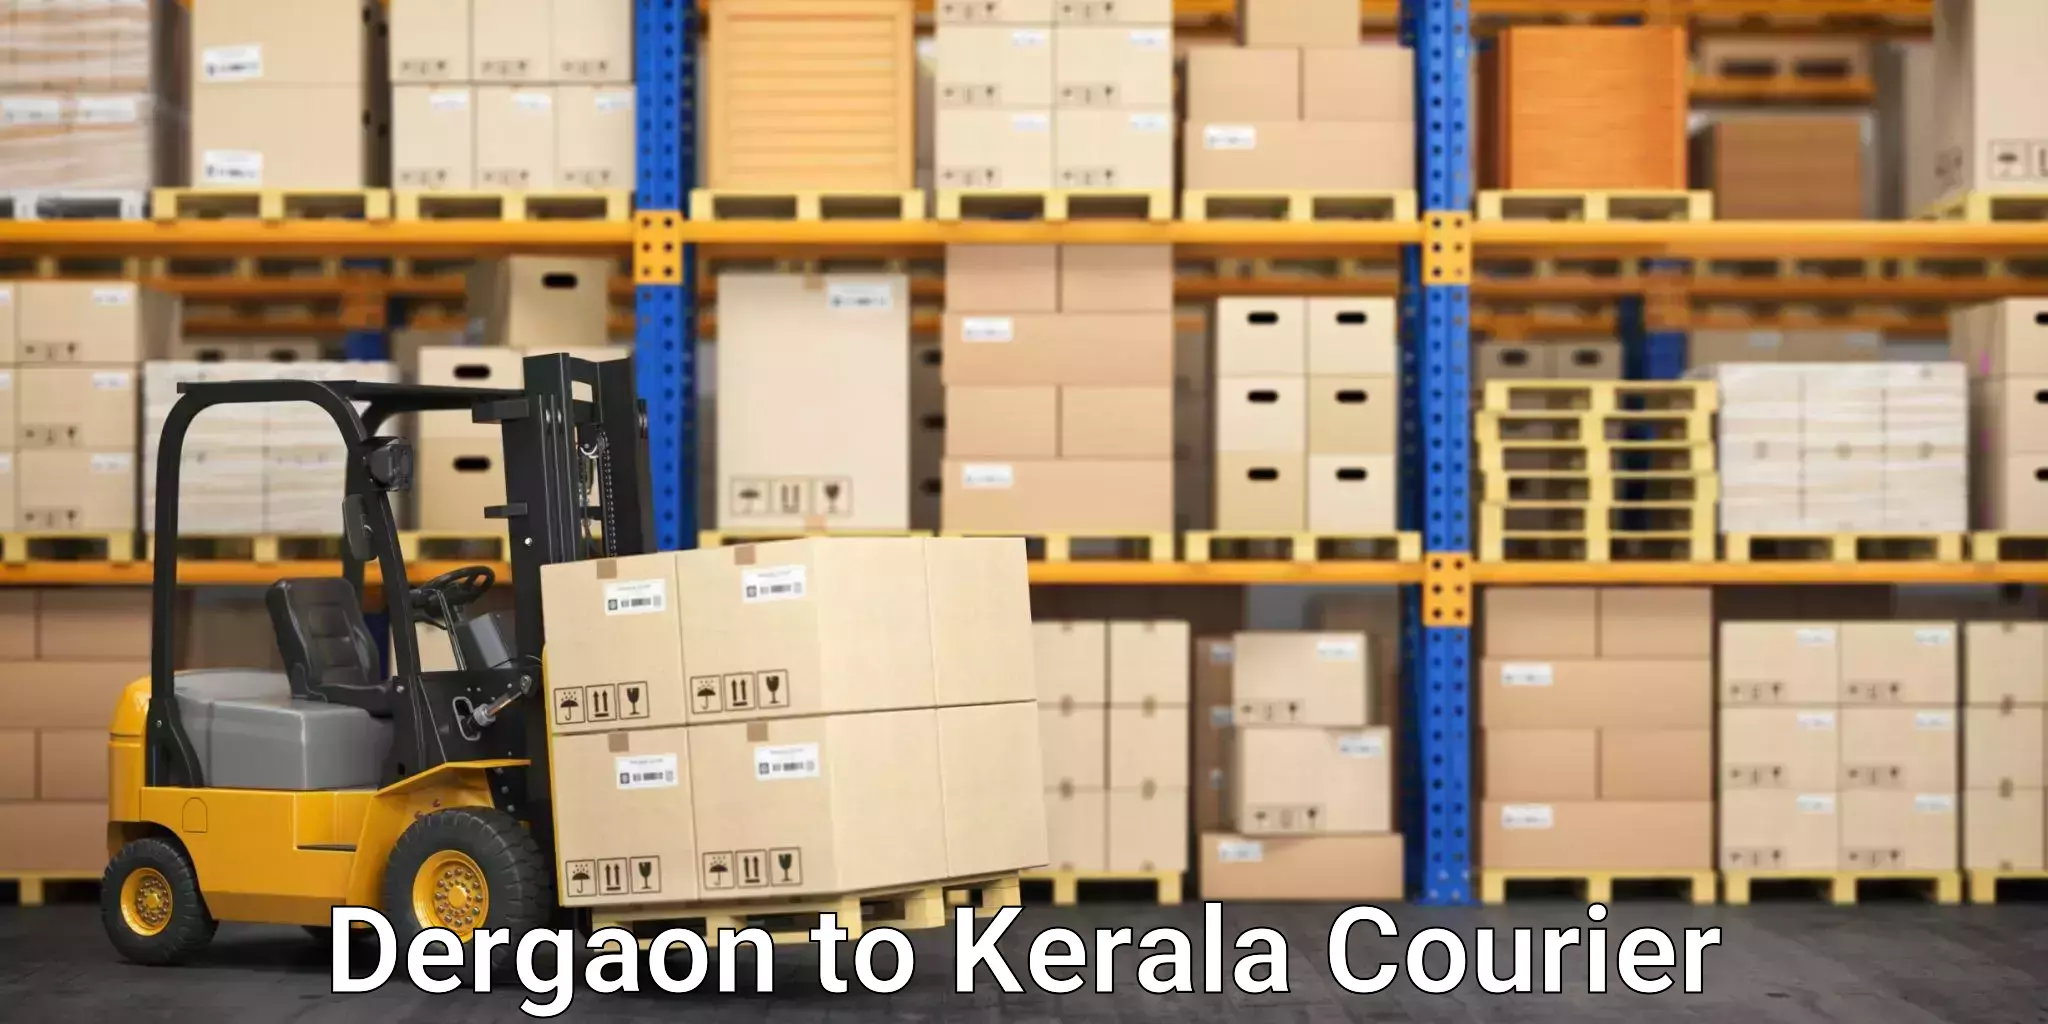 Medical delivery services Dergaon to Kerala